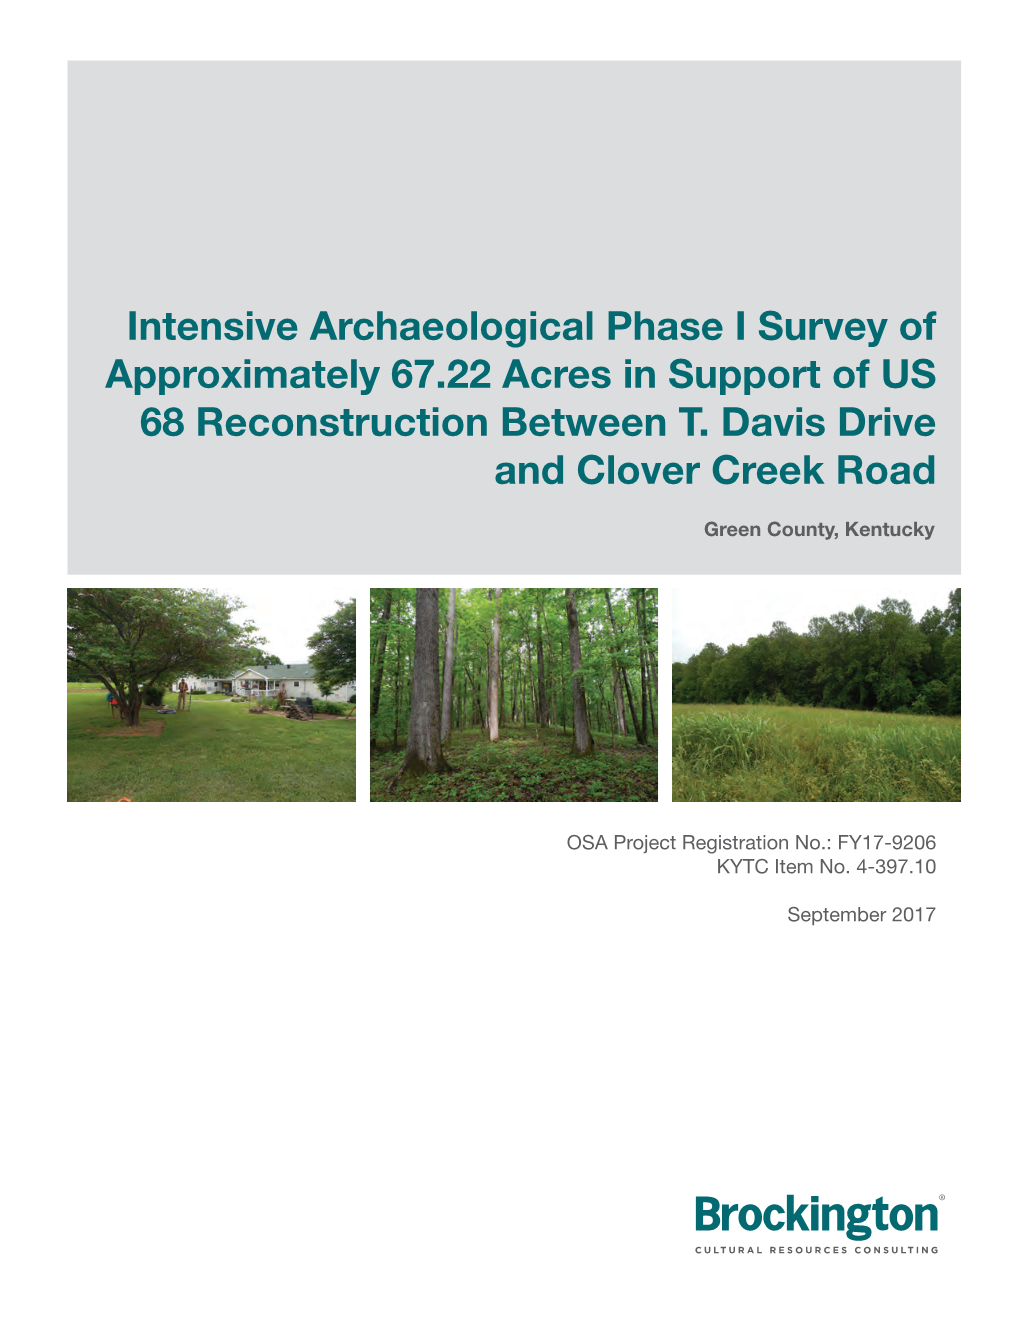 Intensive Archaeological Phase I Survey of Approximately 67.22 Acres in Support of US 68 Reconstruction Between T